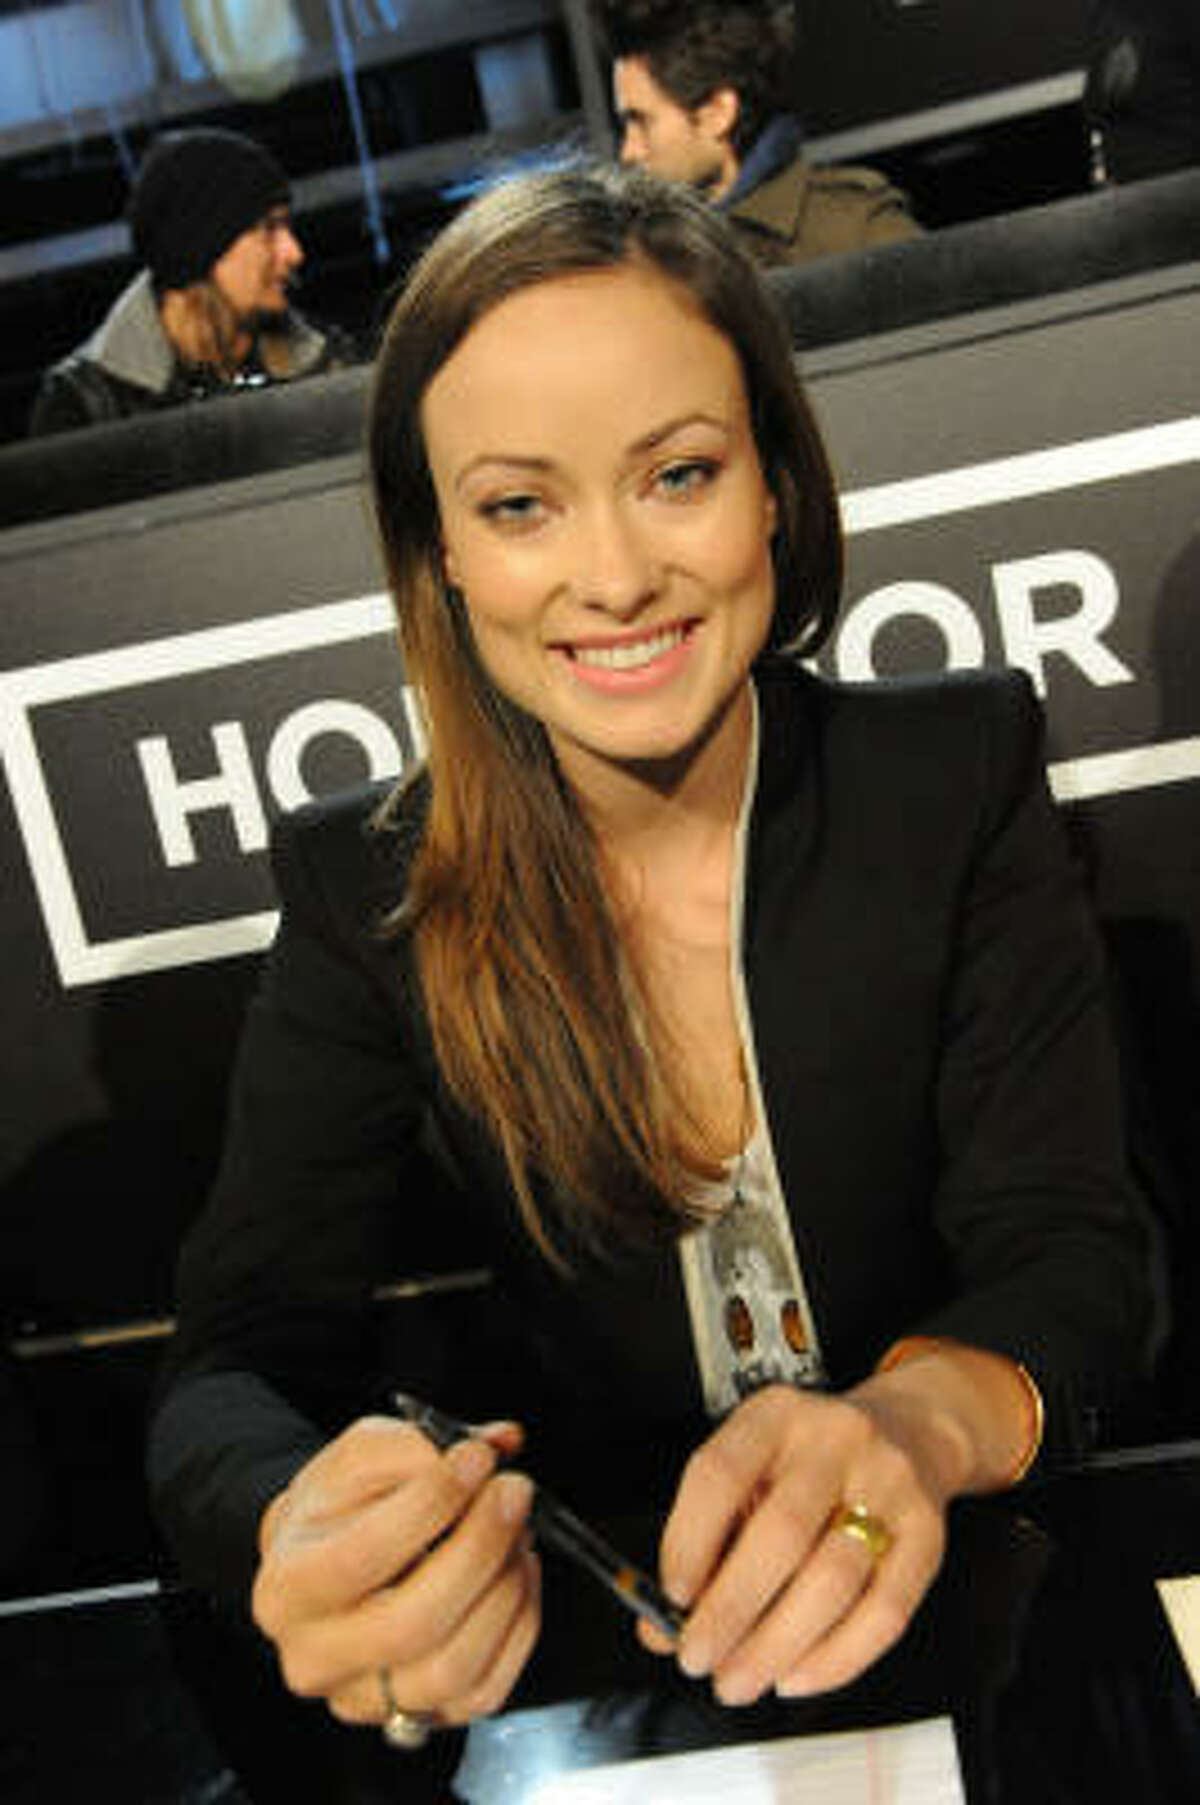 LOS ANGELES, CA - JANUARY 22: In this handout photo provided by MTV, actress Olivia Wilde waits to answer phones during the Hope For Haiti Now: A Global Benefit For Earthquake Relief telethon on January 22, 2010 in Los Angeles, California. (Photo by Jeff Kravitz/MTV Hope for Haiti Now via Getty Images)